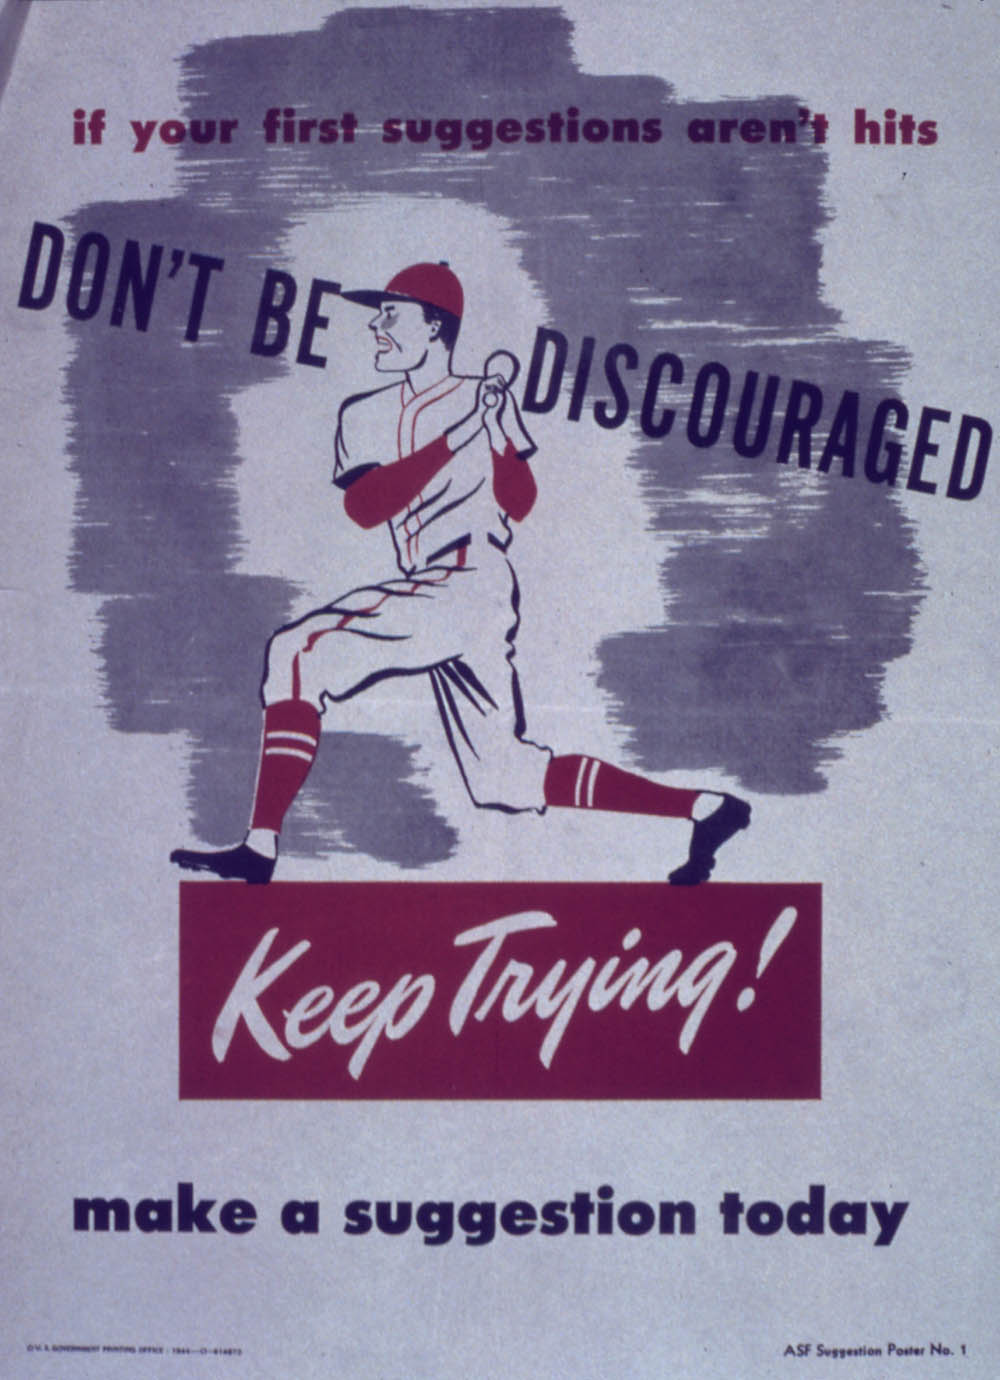 If your first suggestions aren't hits, don't be discouraged. Keep Trying! Make a Suggestion Today. (Office for Emergency Management, Office of War Information, U.S. National Archives.)